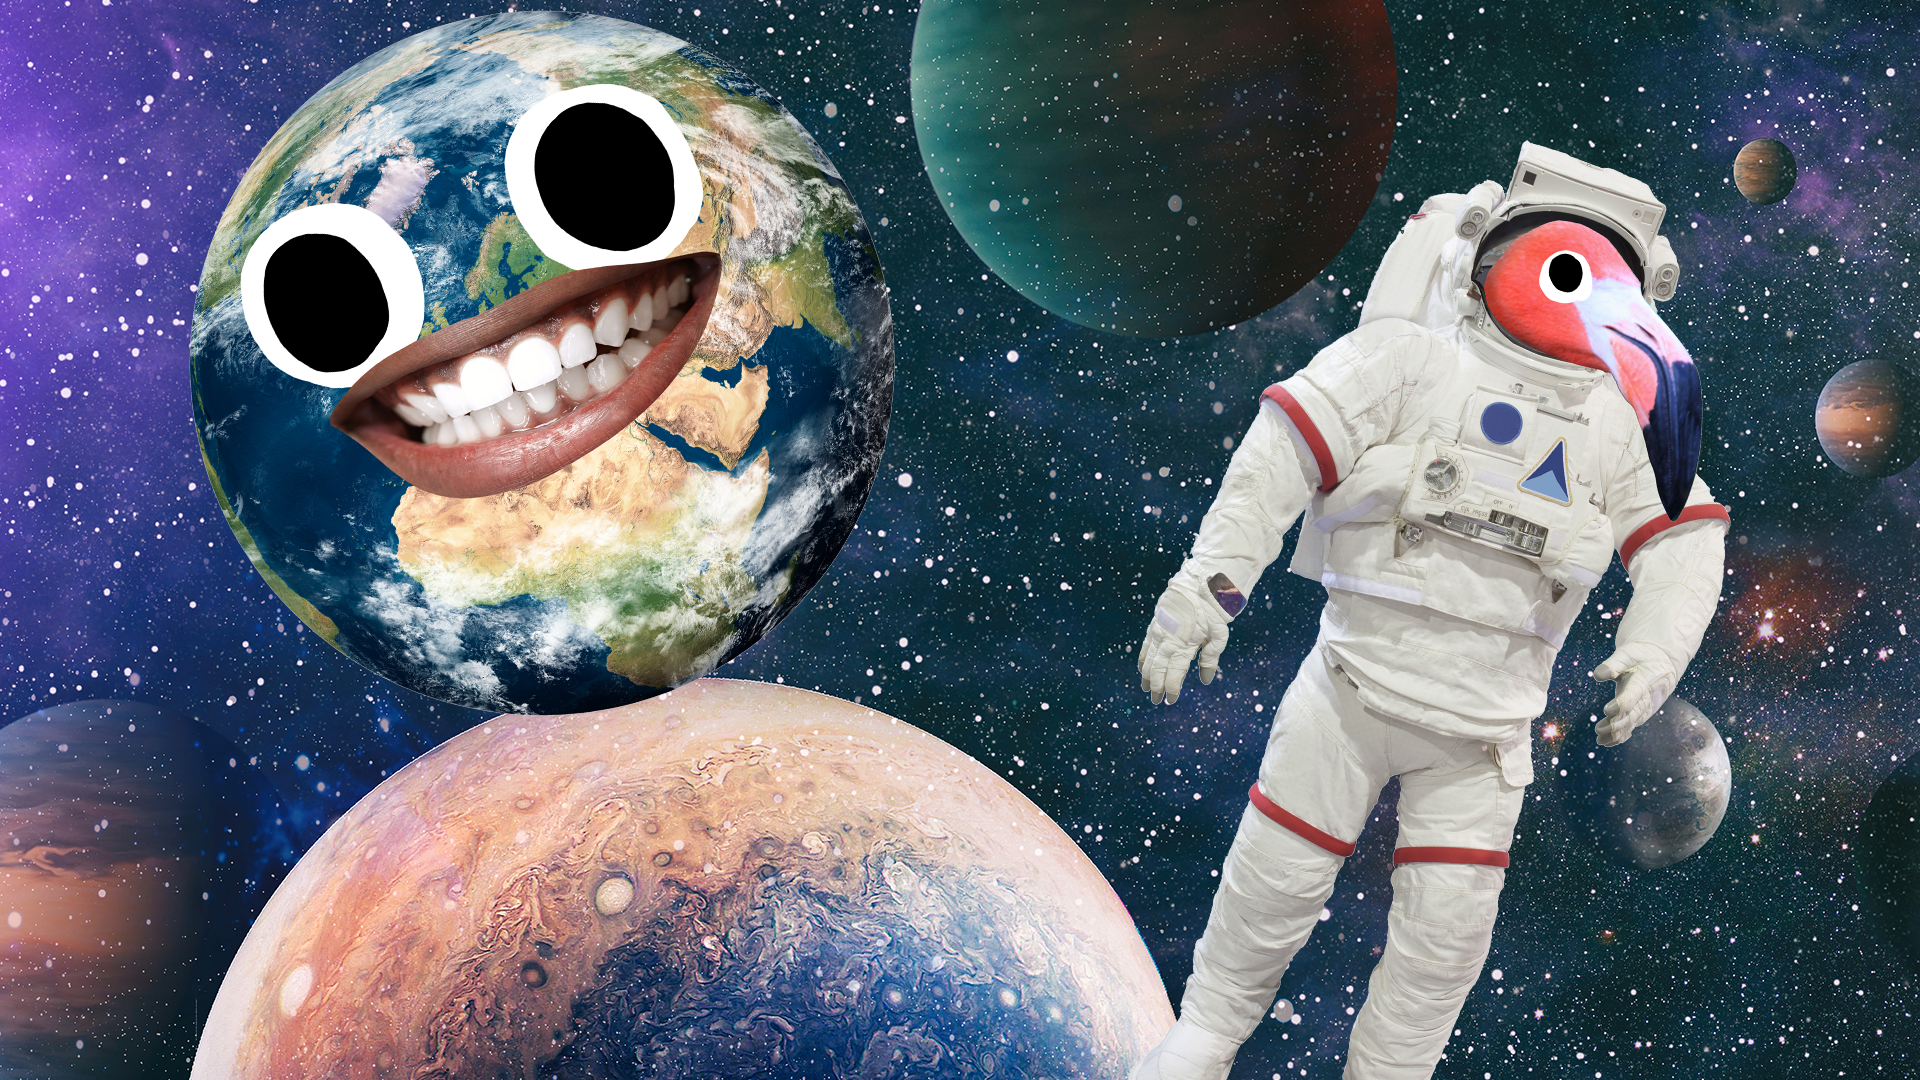 Planets and flamingo astronaut